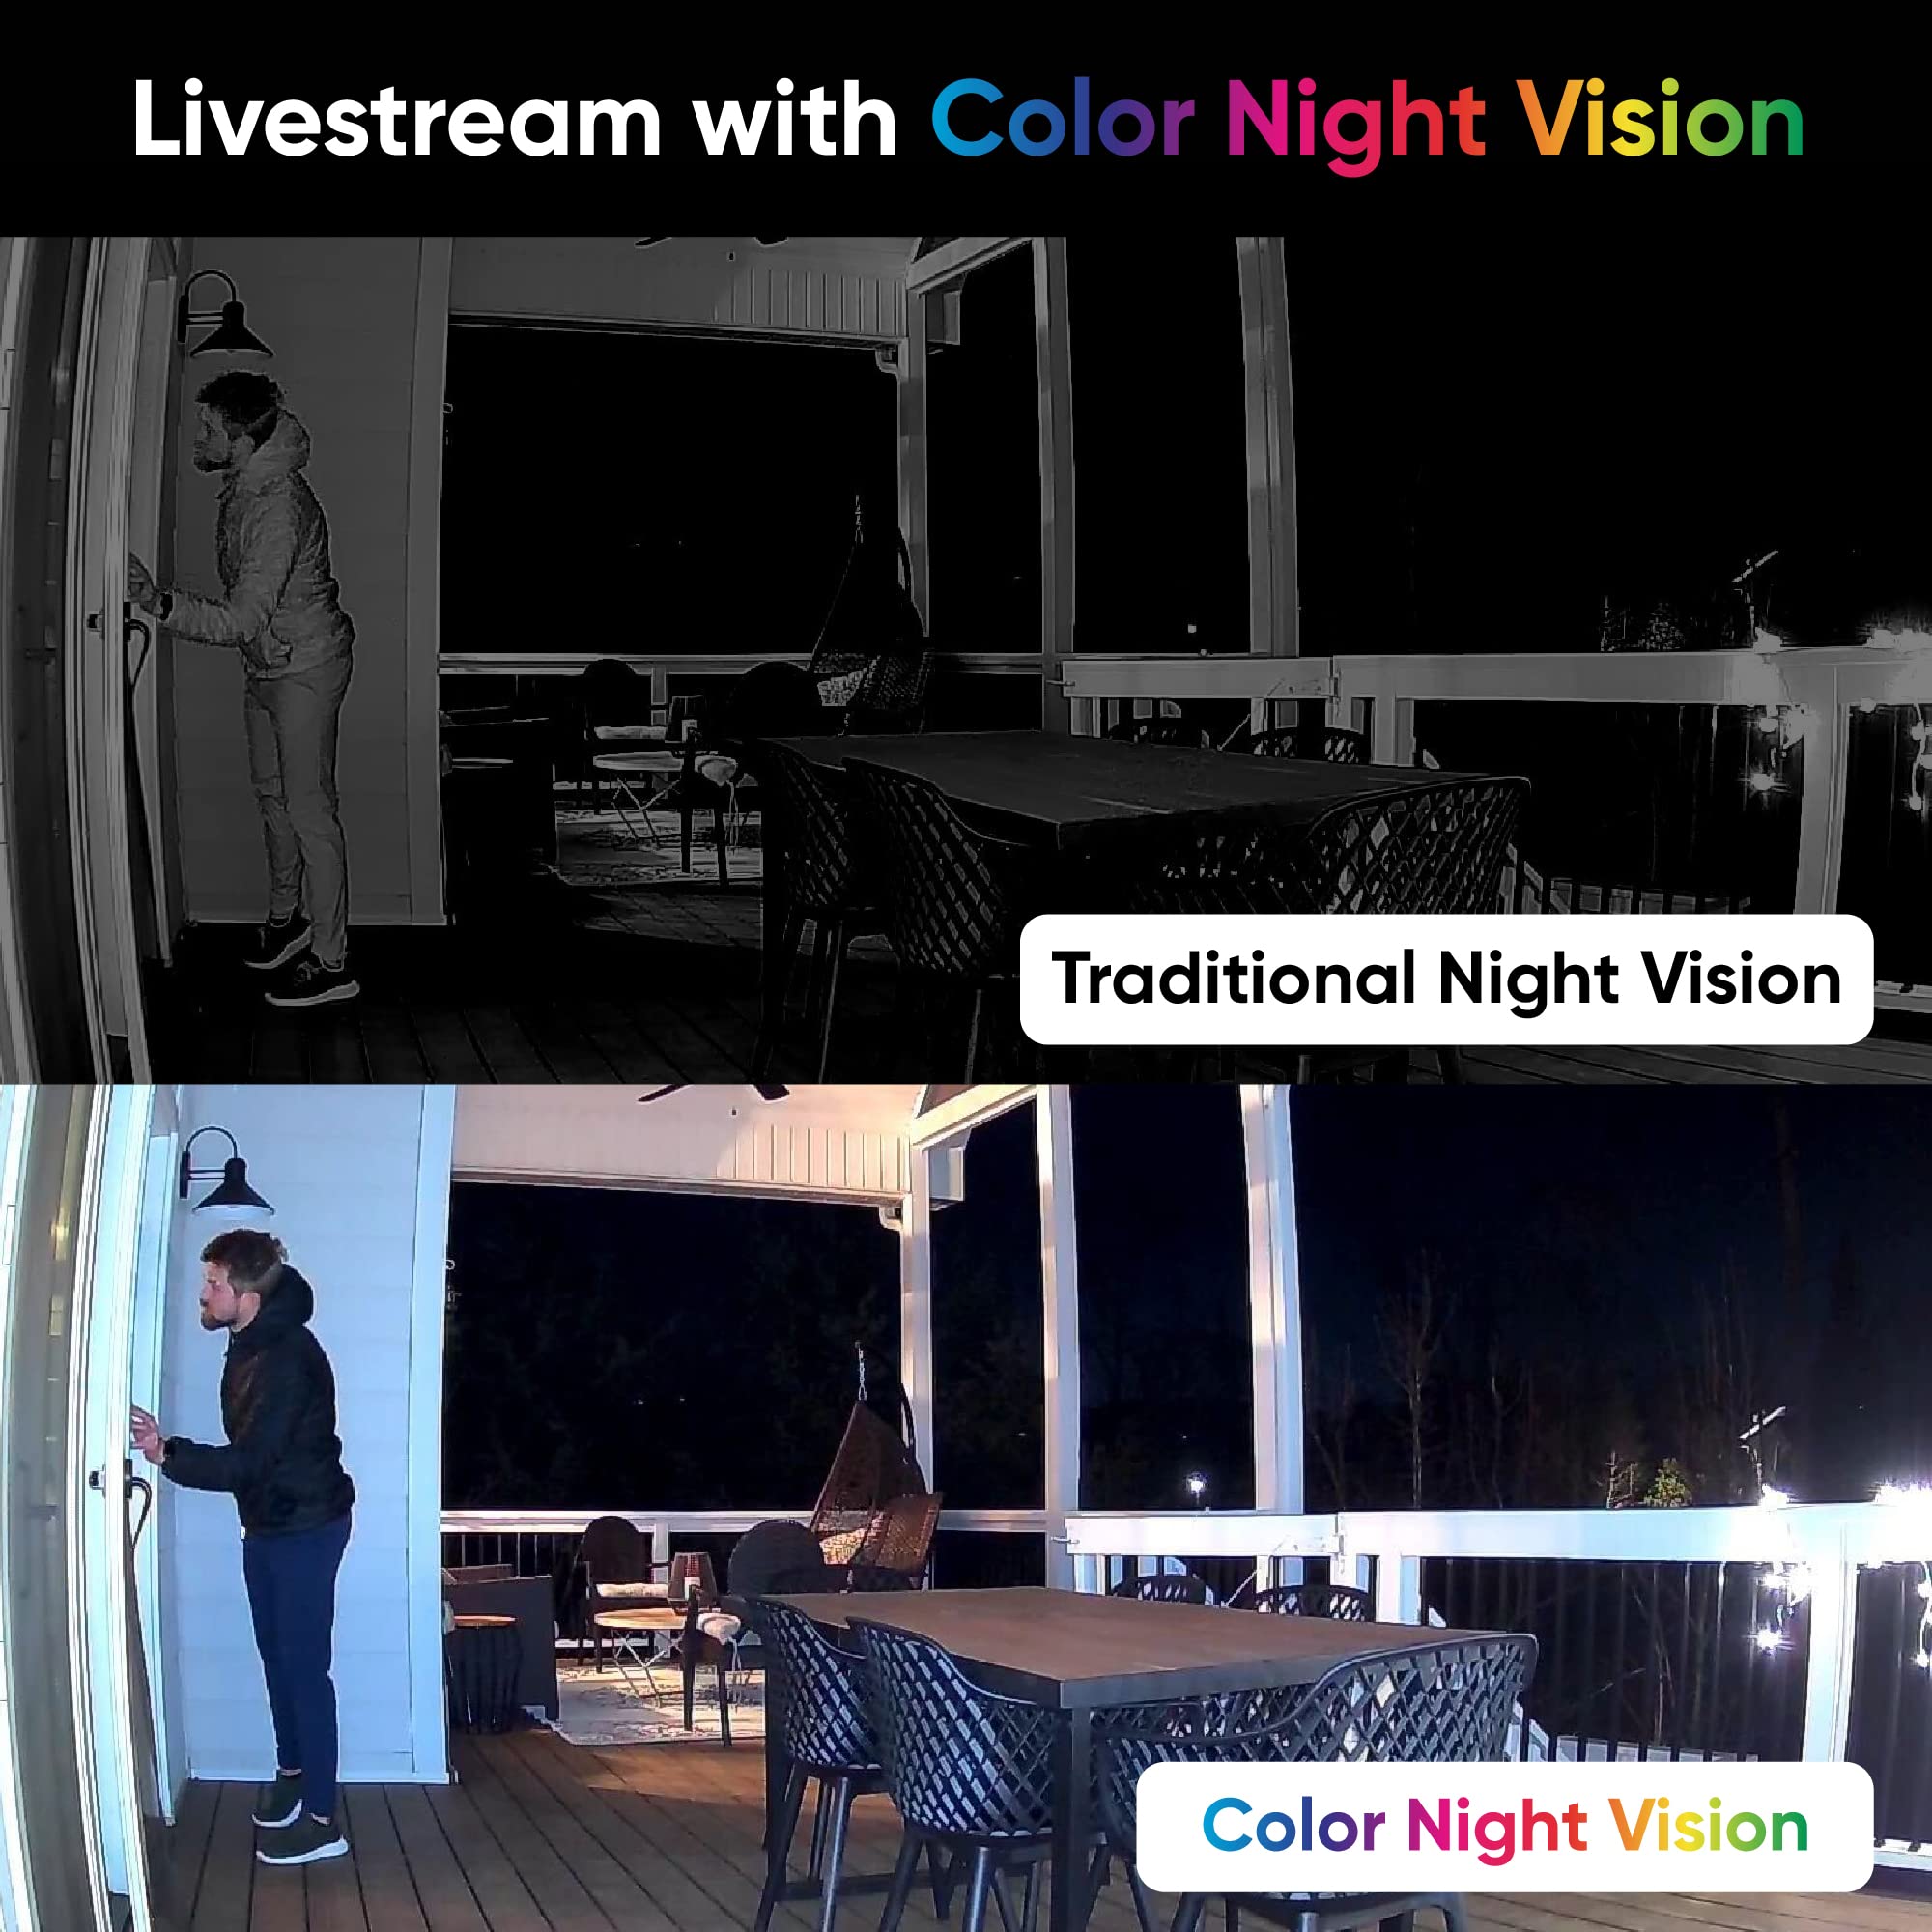 WYZE Cam OG Indoor/Outdoor 1080p WI-Fi Smart Home Security Camera with Color Night Vision, Built-in Spotlight, Motion Detection, 2-Way Audio, Compatible with Alexa & Google Assistant, White (2-Pack)